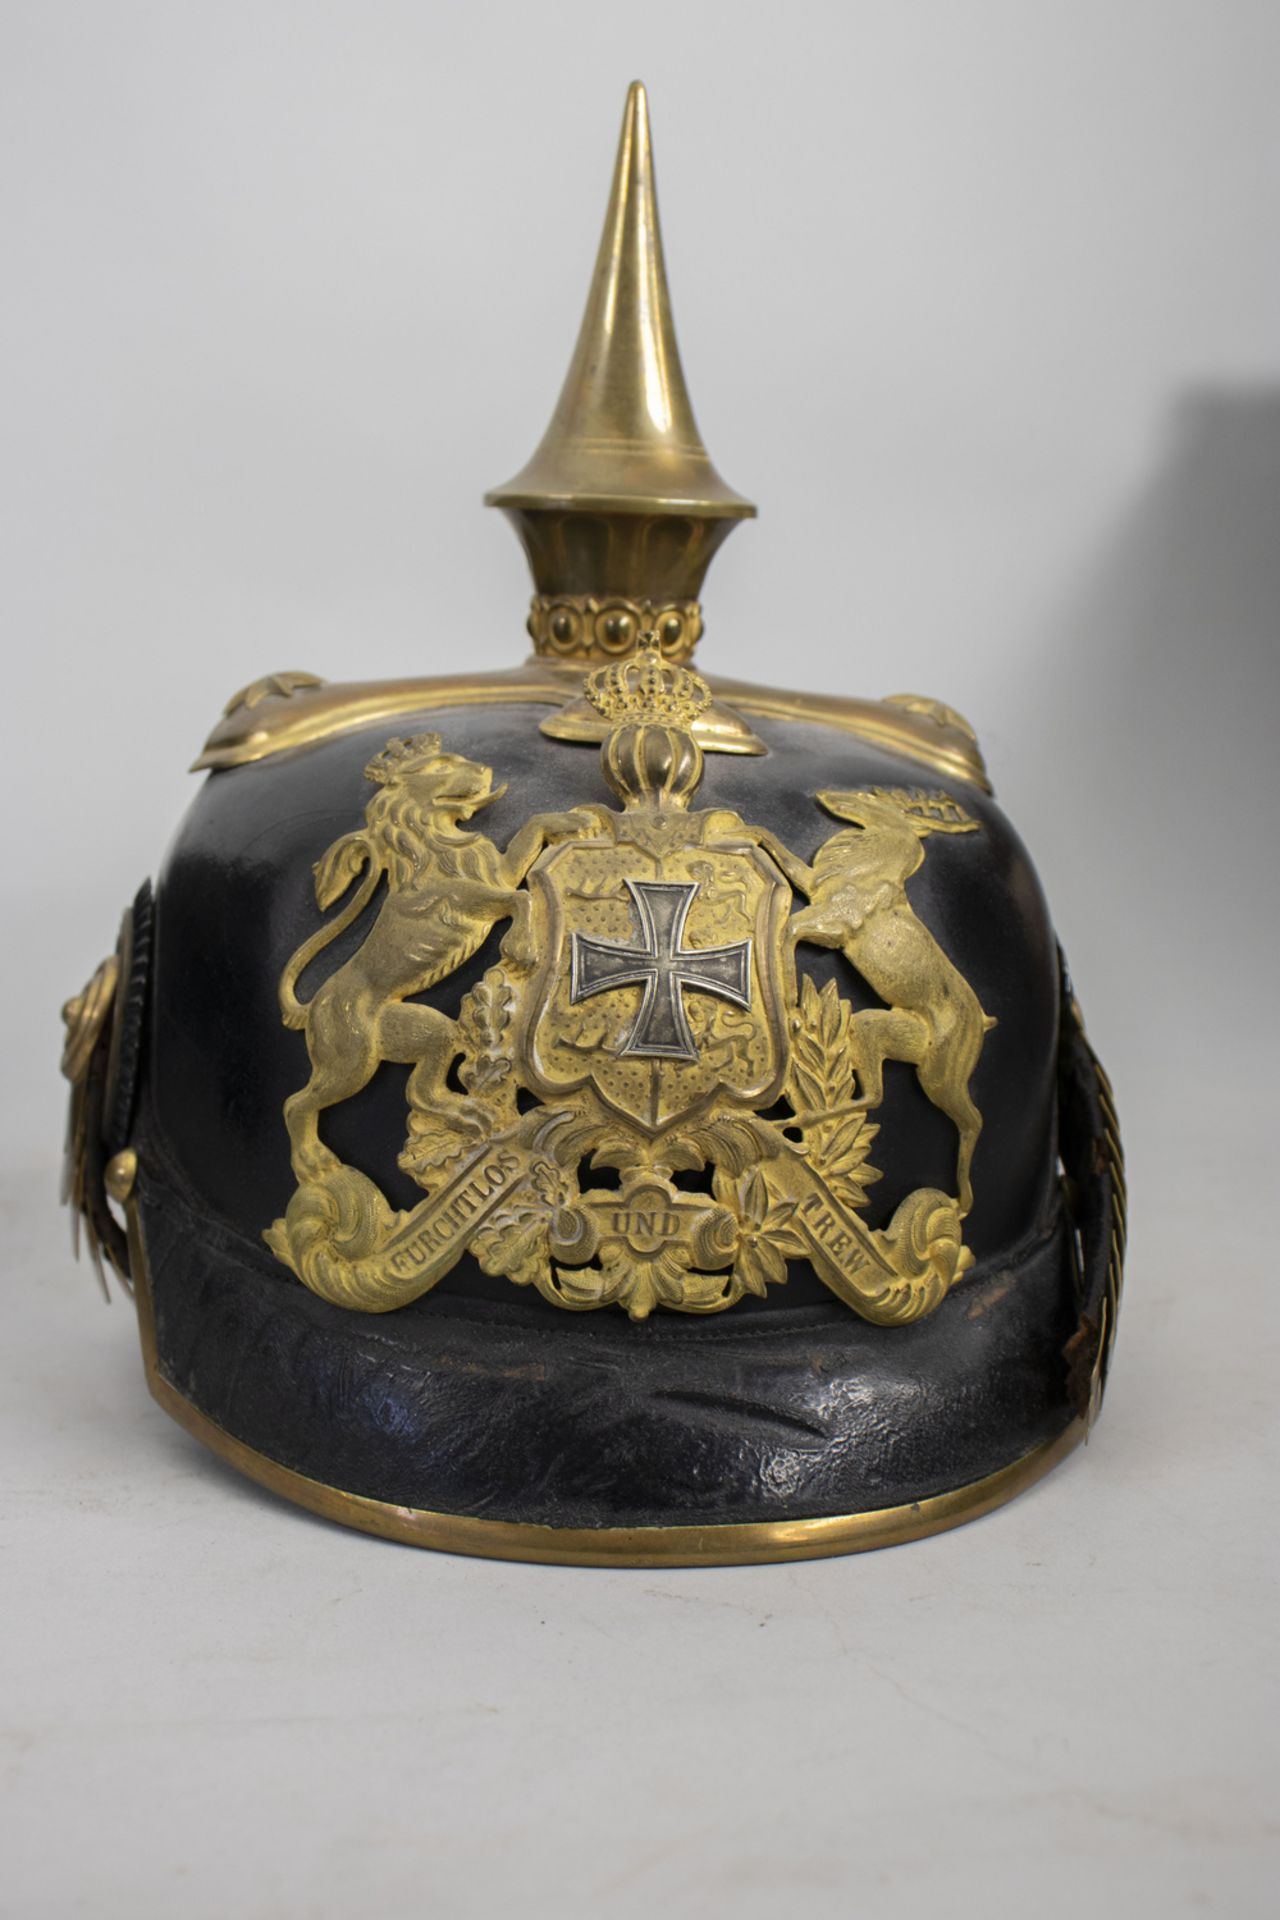 Pickelhaube mit Lederkoffer / A spiked helmet with leather box, Württemberg, um 1910